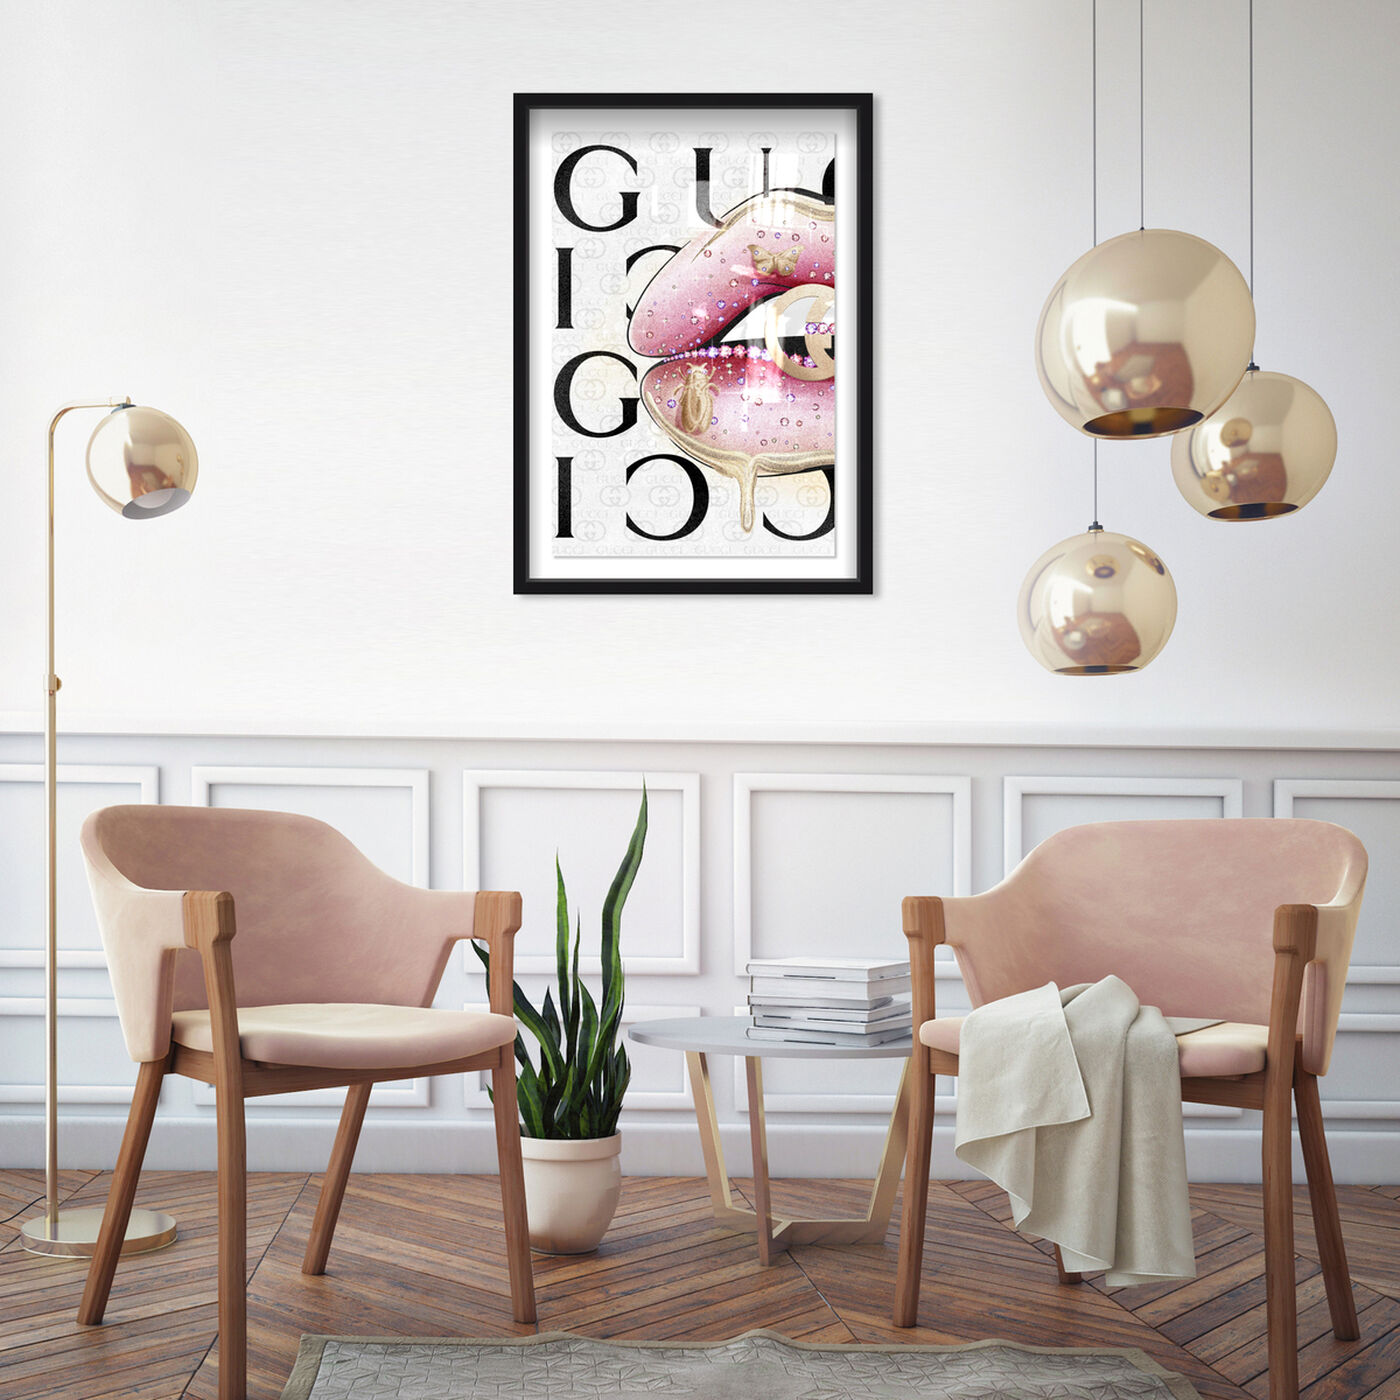 Hanging view of Haute Up featuring fashion and glam and lips art.